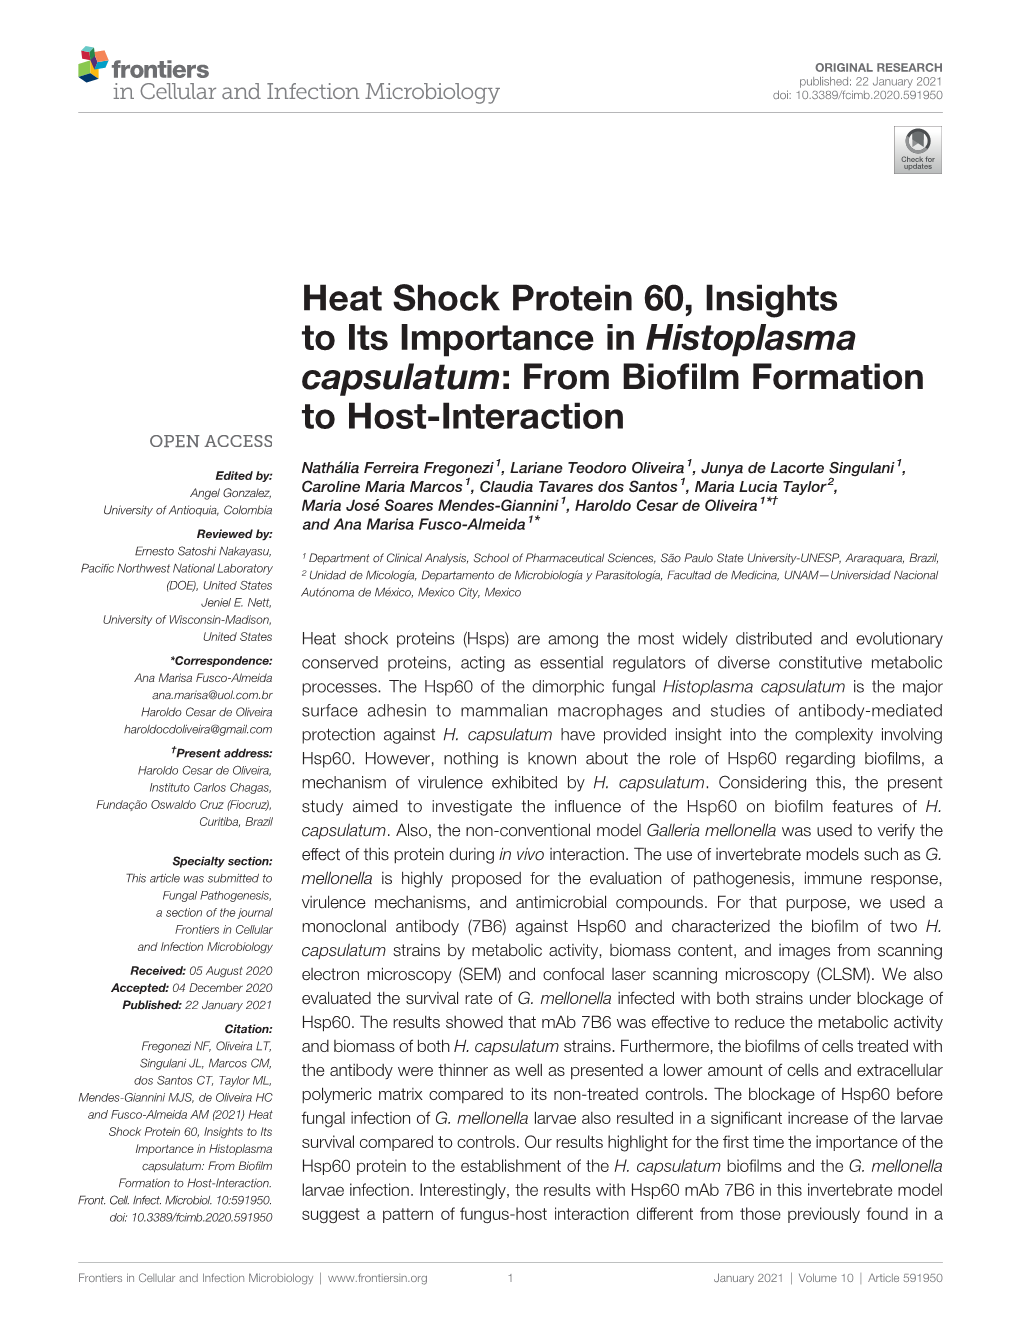 Heat Shock Protein 60, Insights to Its Importance in Histoplasma Capsulatum: from Bioﬁlm Formation to Host-Interaction